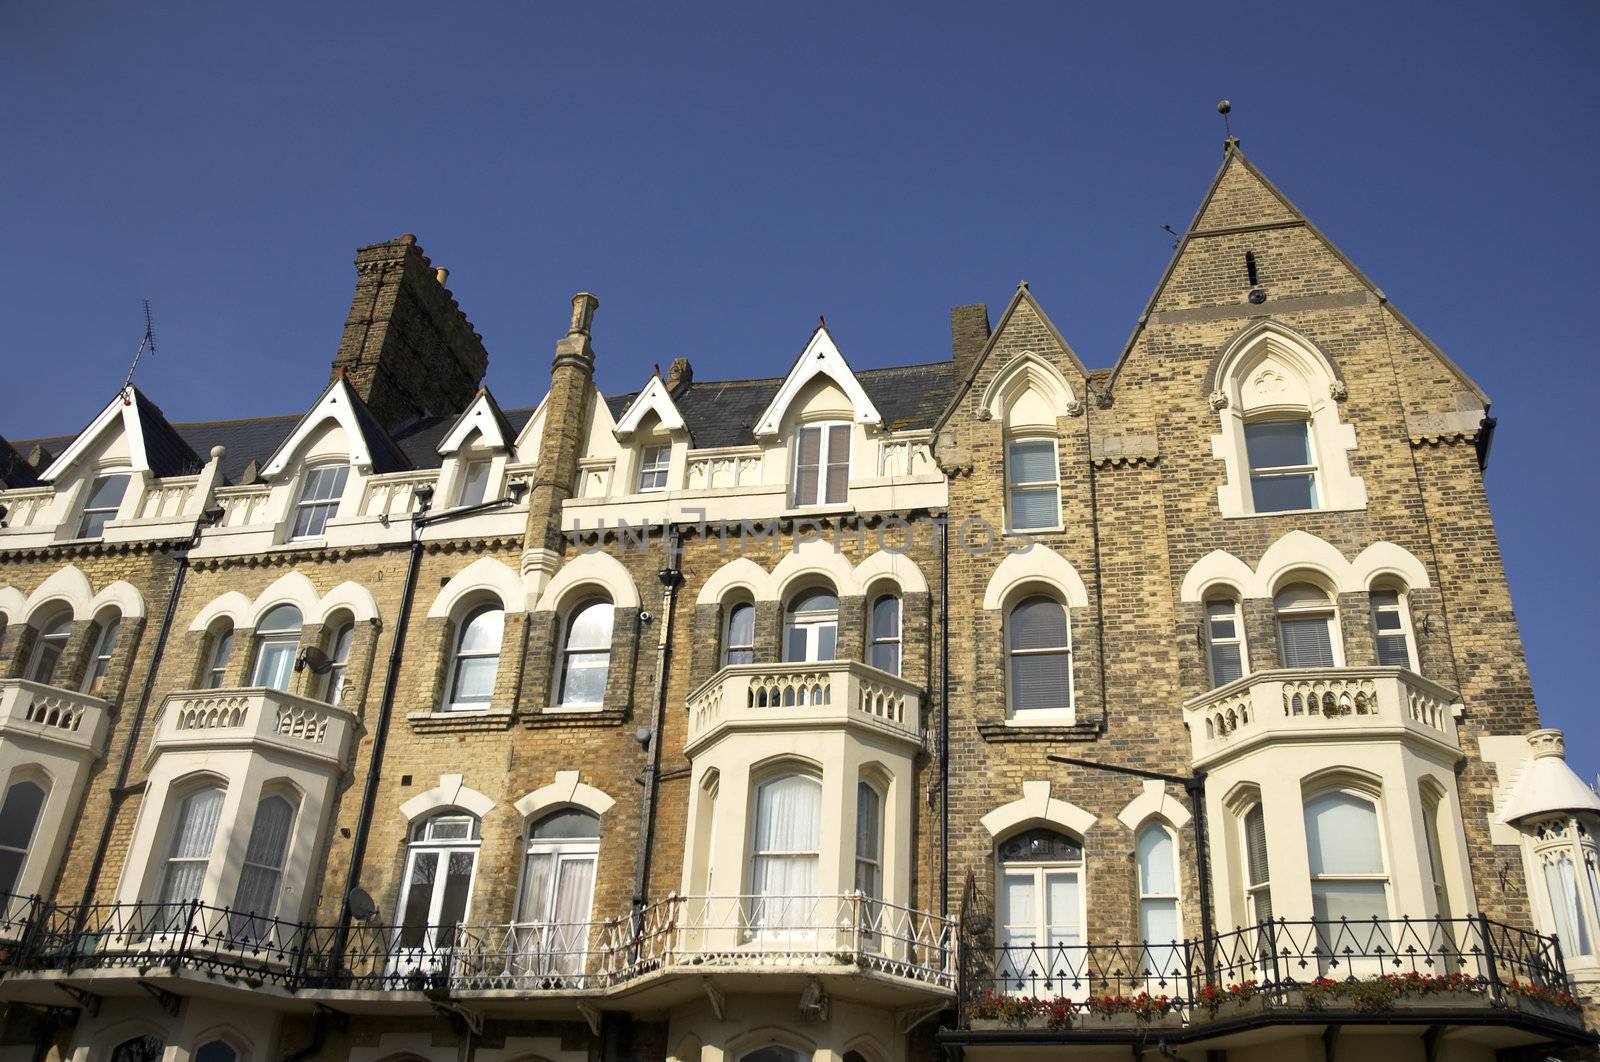 A row of victorian townhouses in England